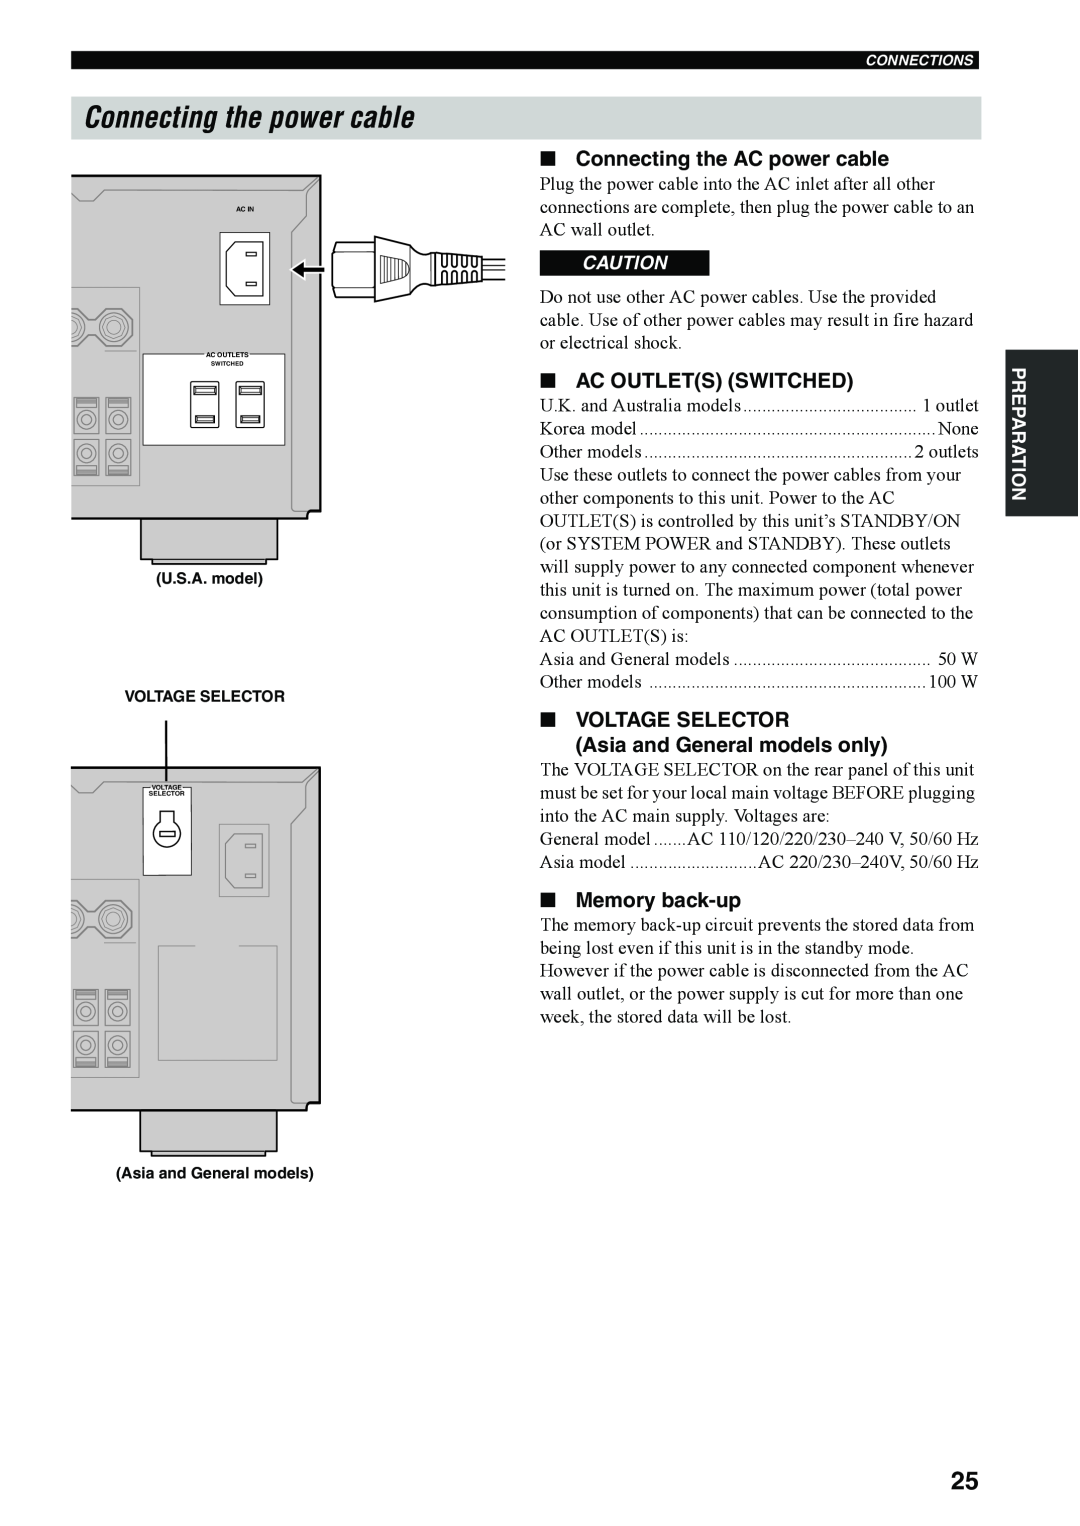 Yamaha RX-V4600 Connecting the power cable, Connecting the AC power cable, Ac Outlets Switched, Voltage Selector 